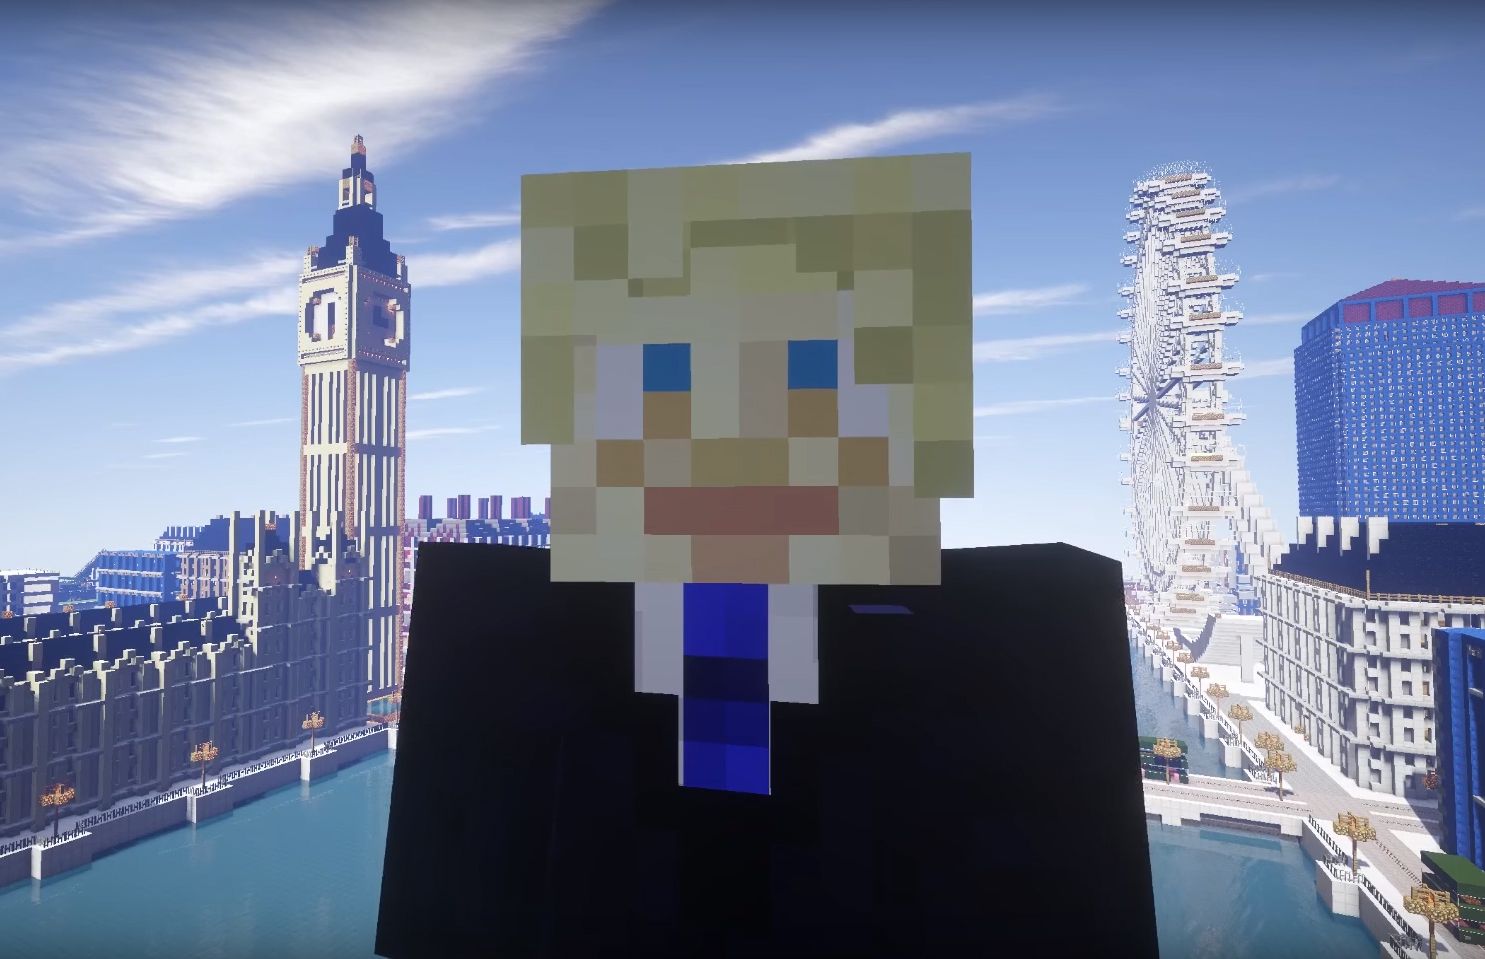  1 2 million games london initiative launched by a minecraft boris johnson image 1